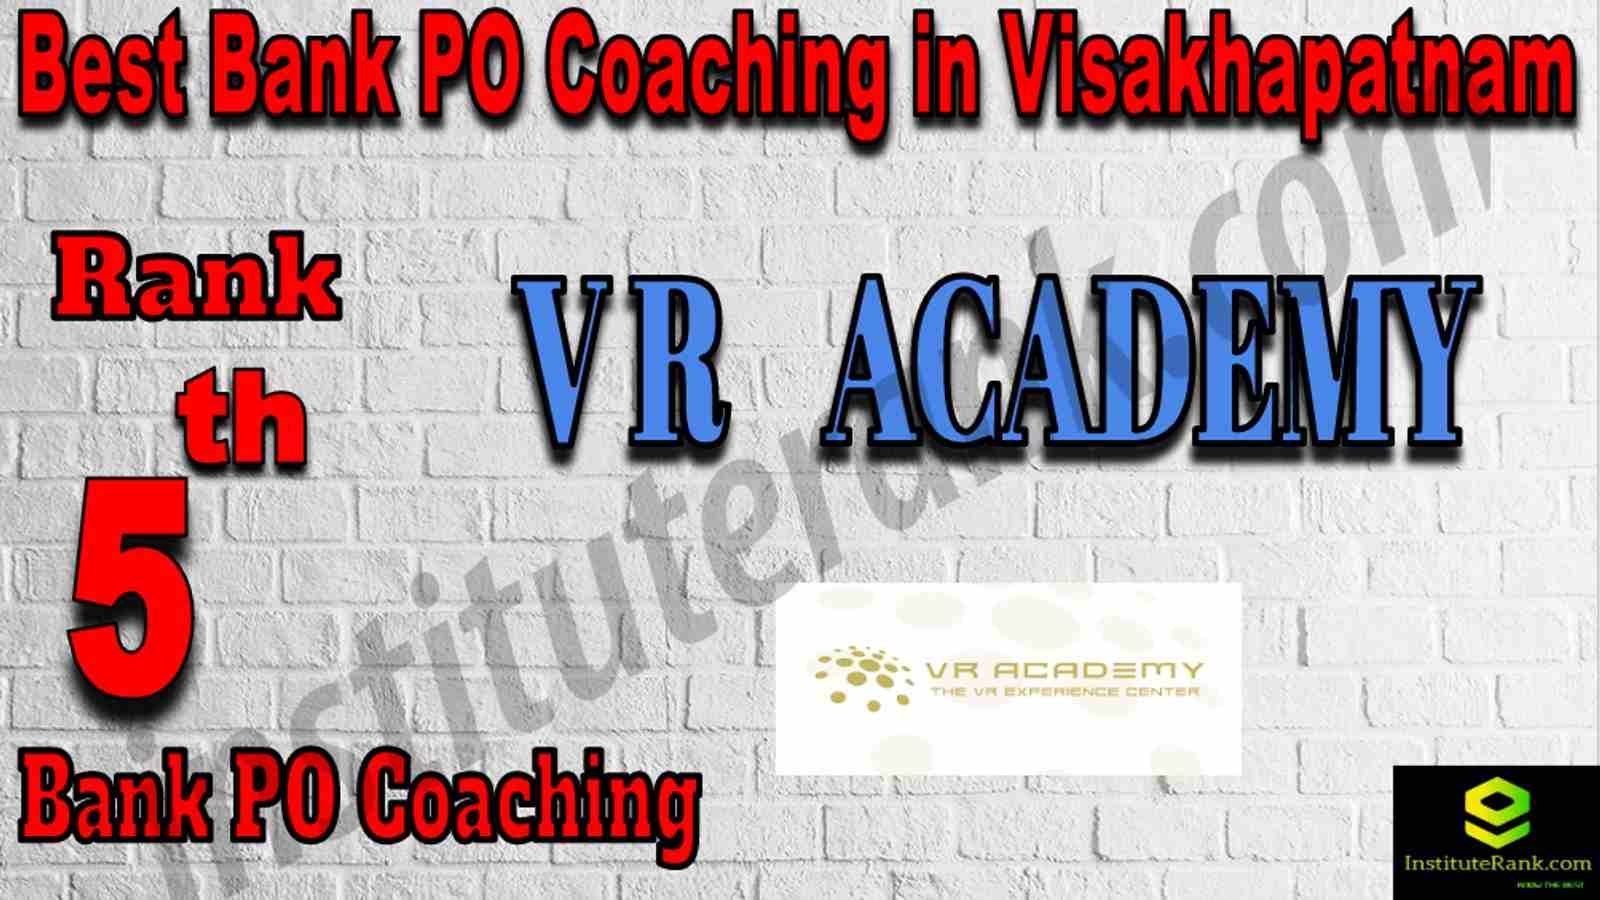 5th Best Bank PO Coaching in Visakhapatnam